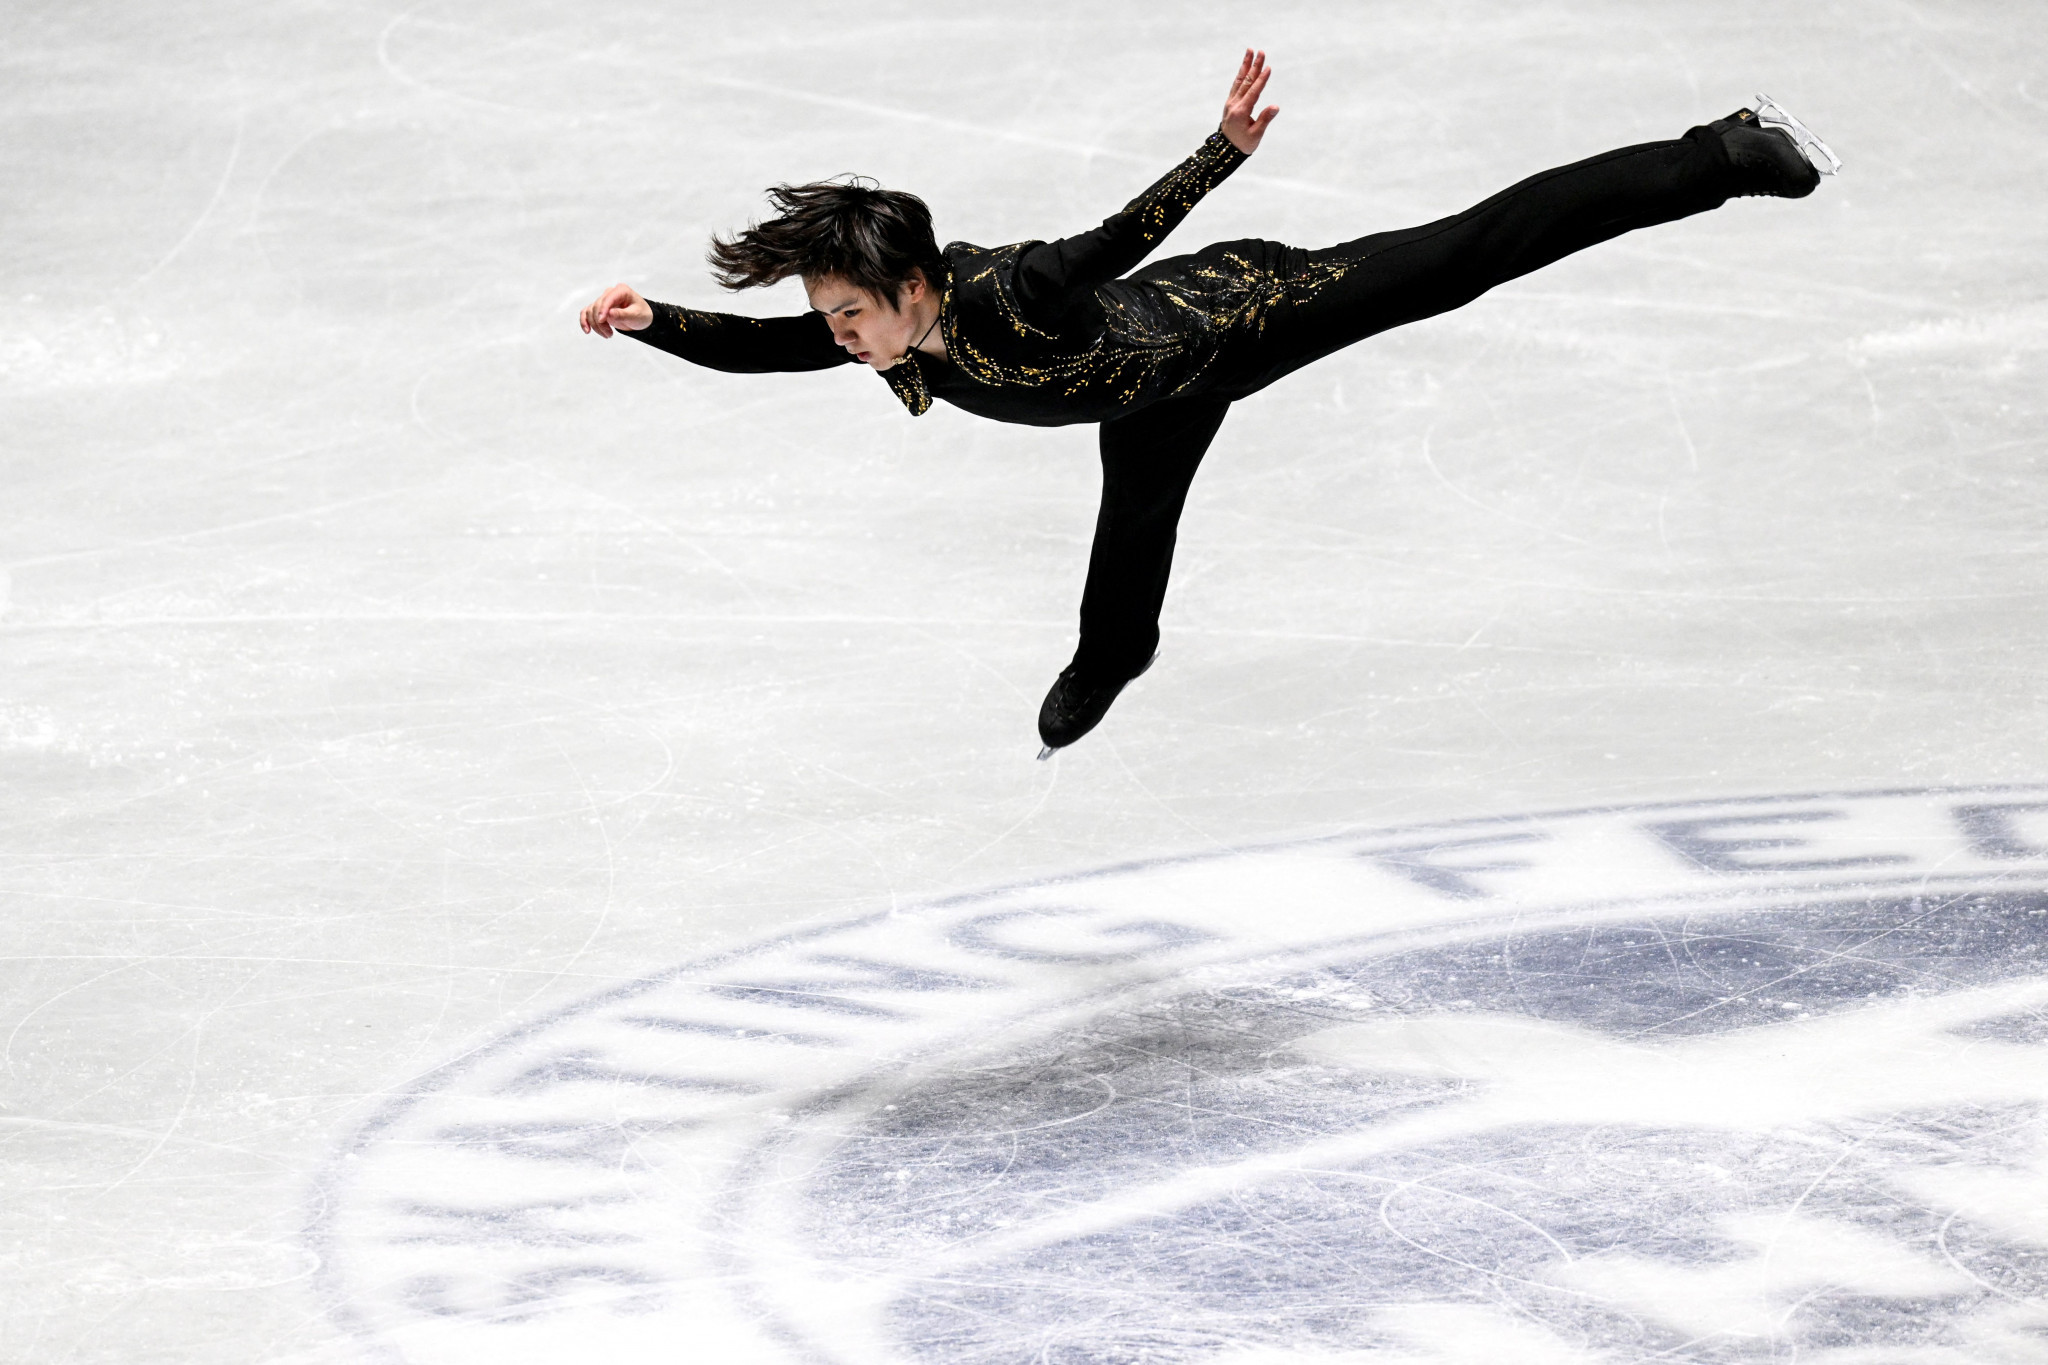 Grand Prix of Figure Skating Final cancelled over Japan's Omicron border closures